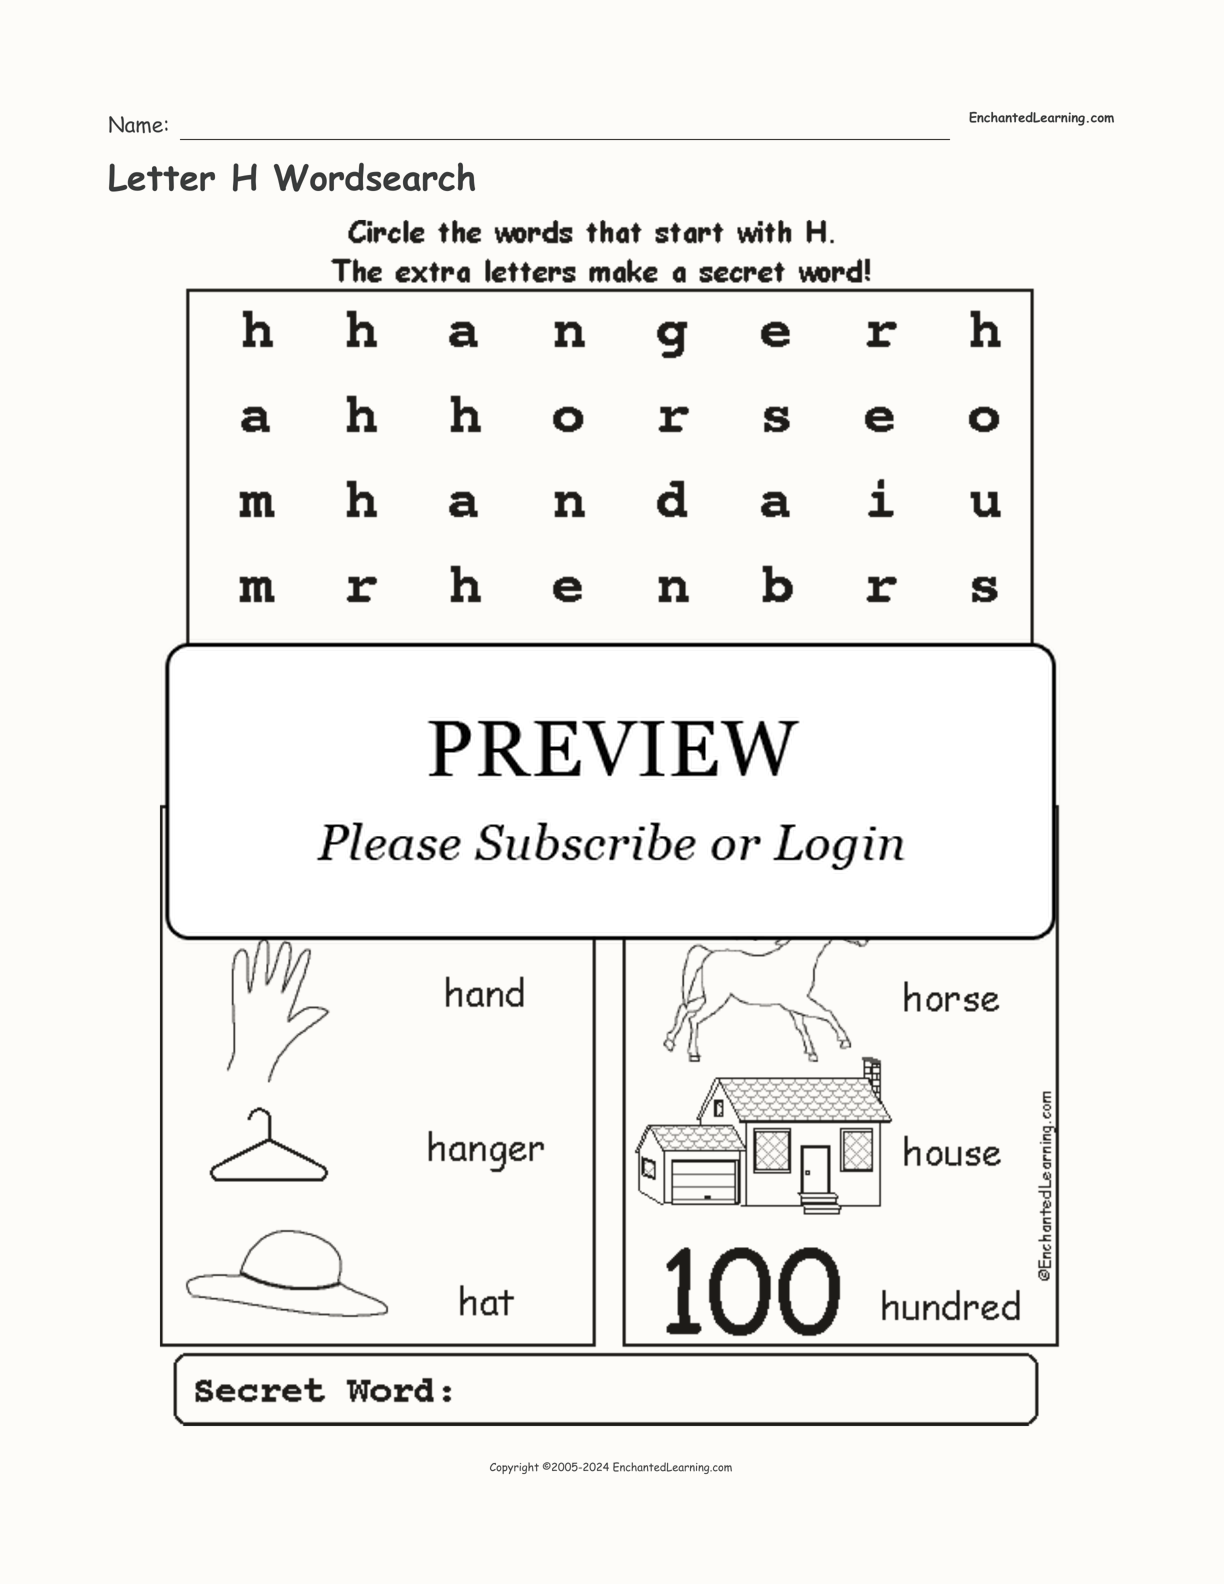 Letter H Wordsearch interactive worksheet page 1